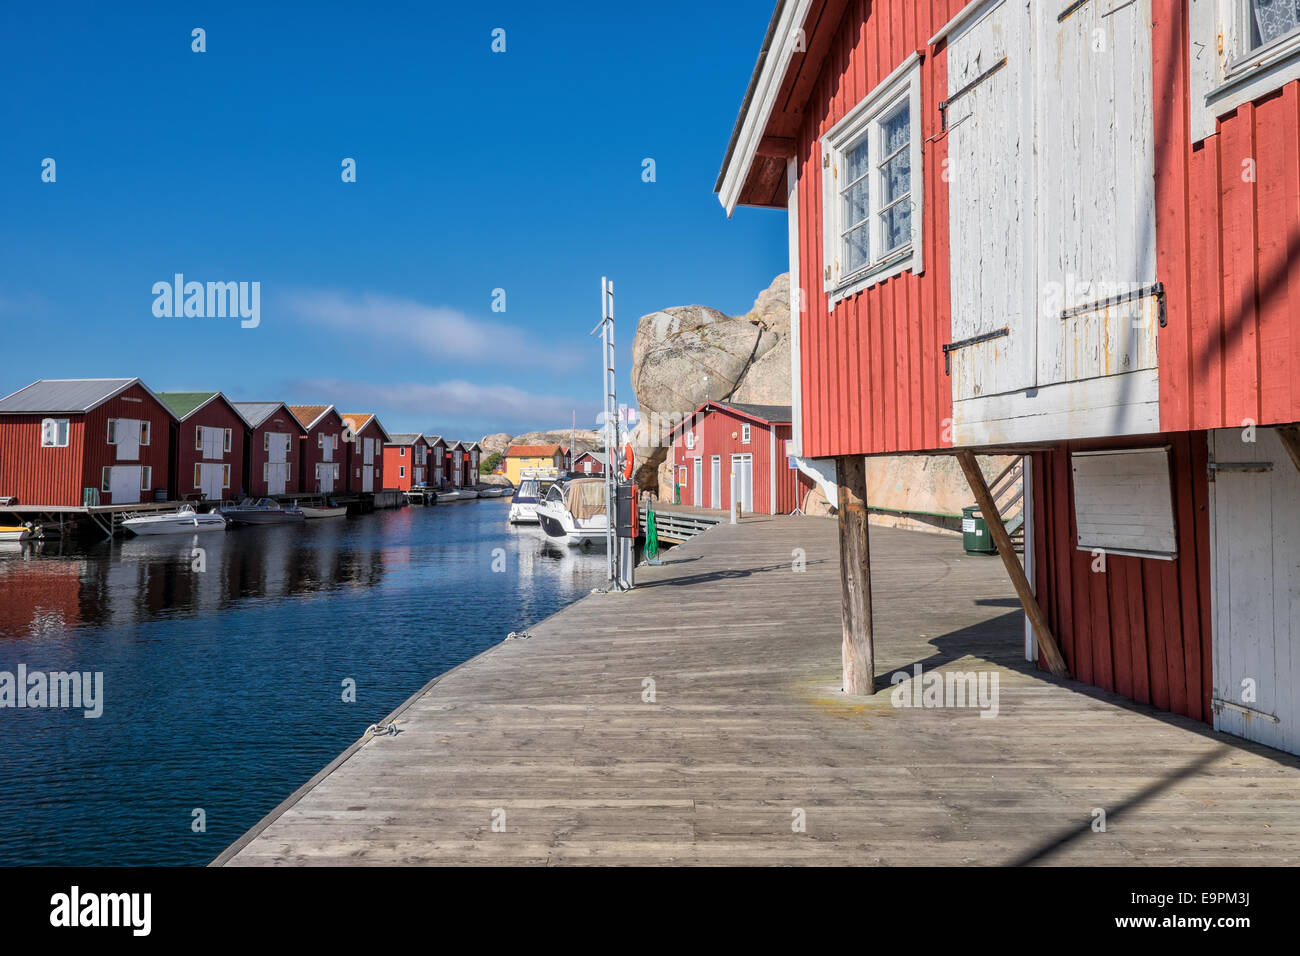 The boardwalk in Smogen, Sweden. Smogen is a famous fishing village and popular tourist destination. Stock Photo